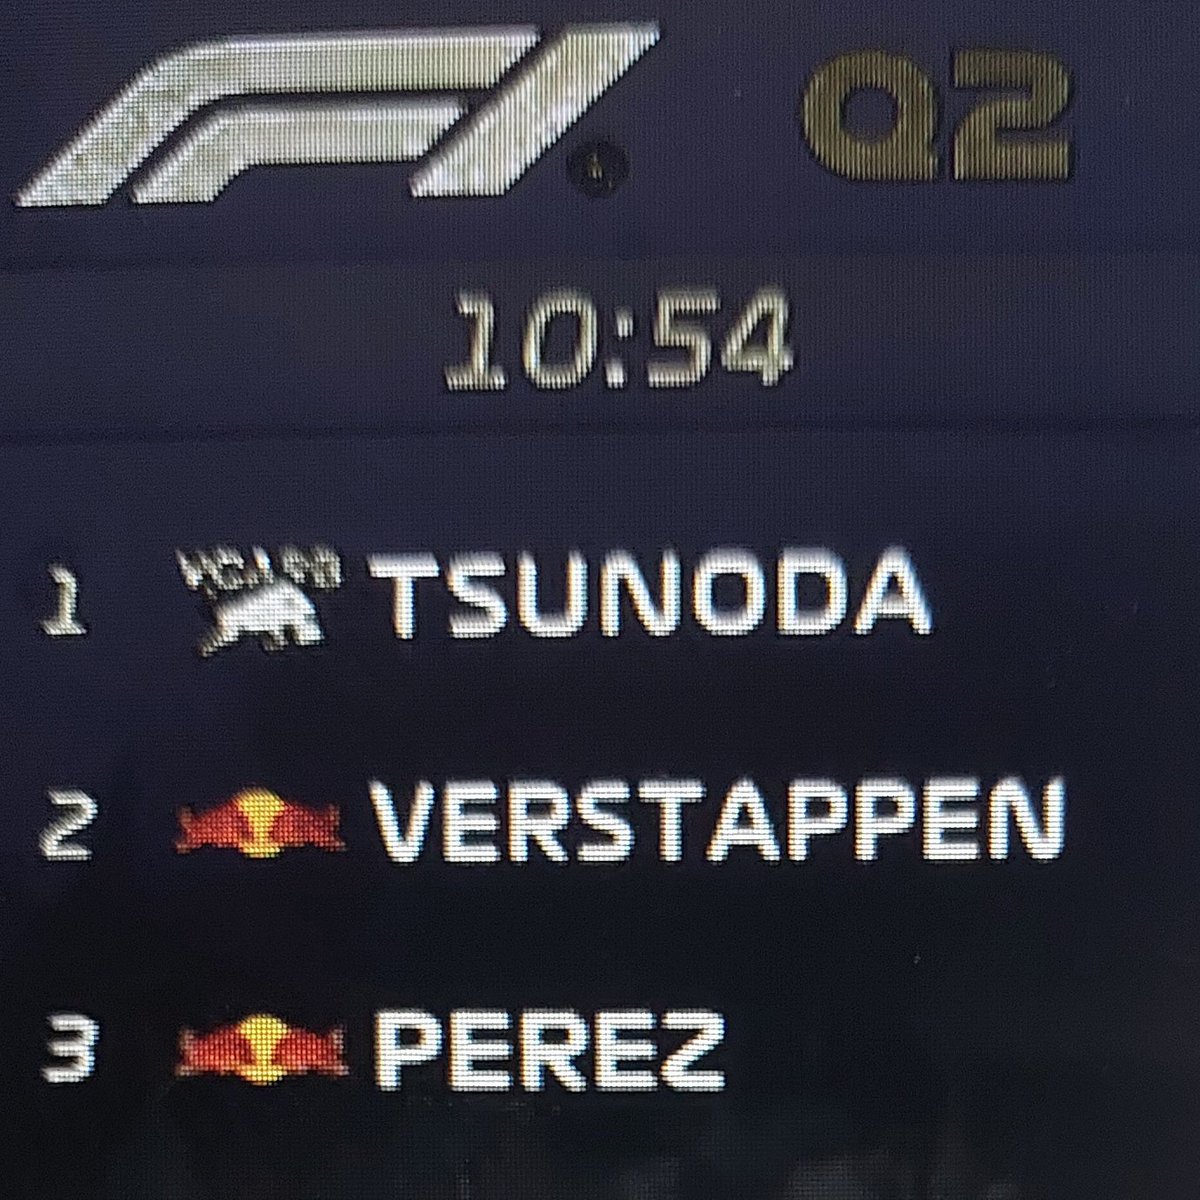 Accurate ranking of Red Bull drivers.